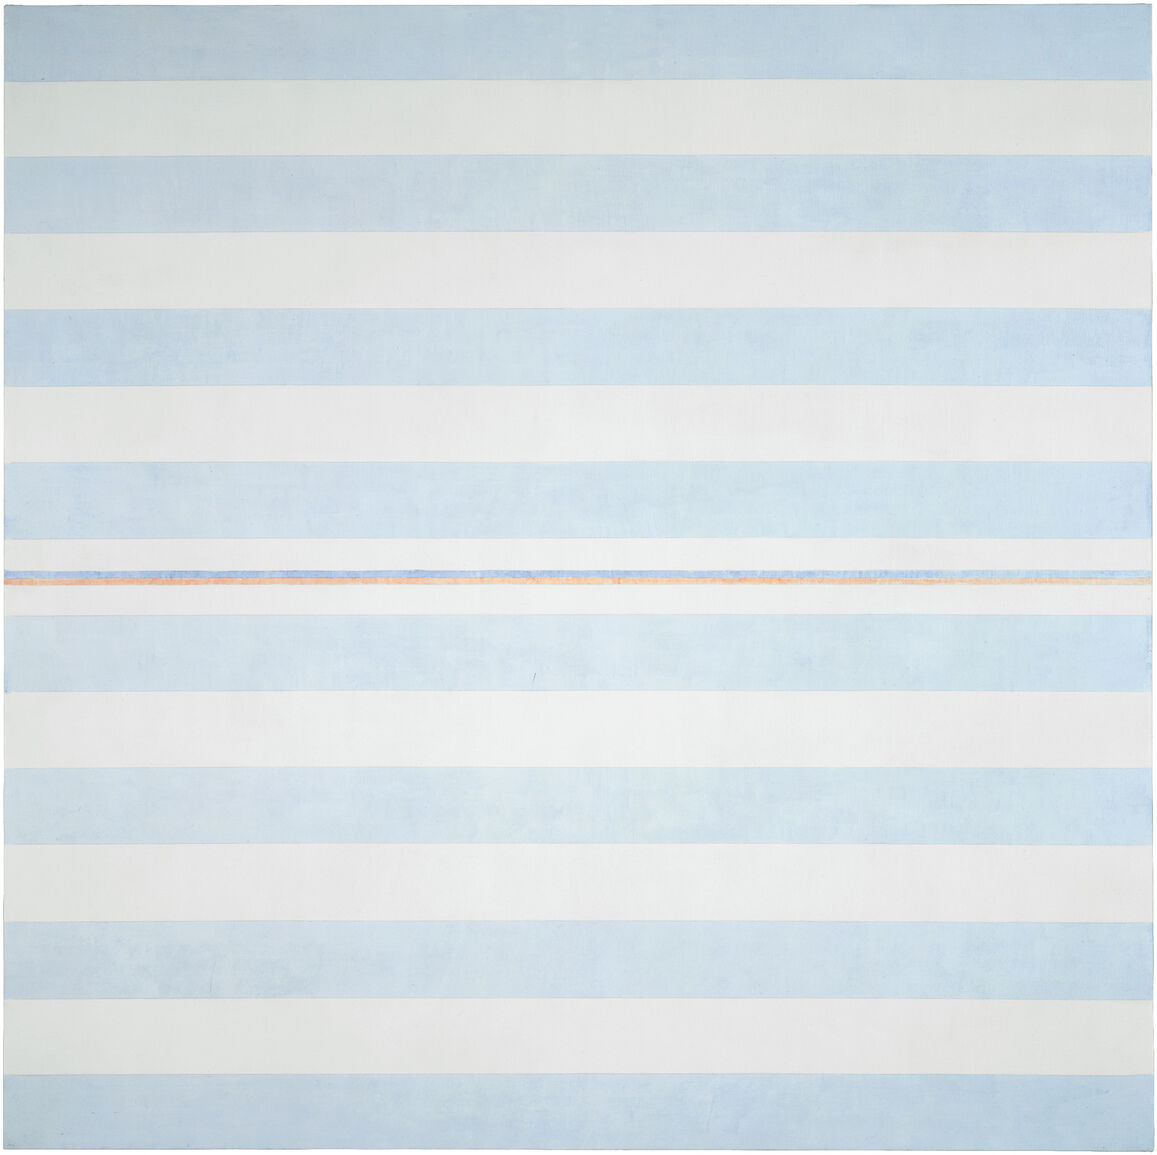 Agnes Martin, Blessings, 2000. © 2018 Estate of Agnes Martin /Artists Rights Society (ARS), New York.